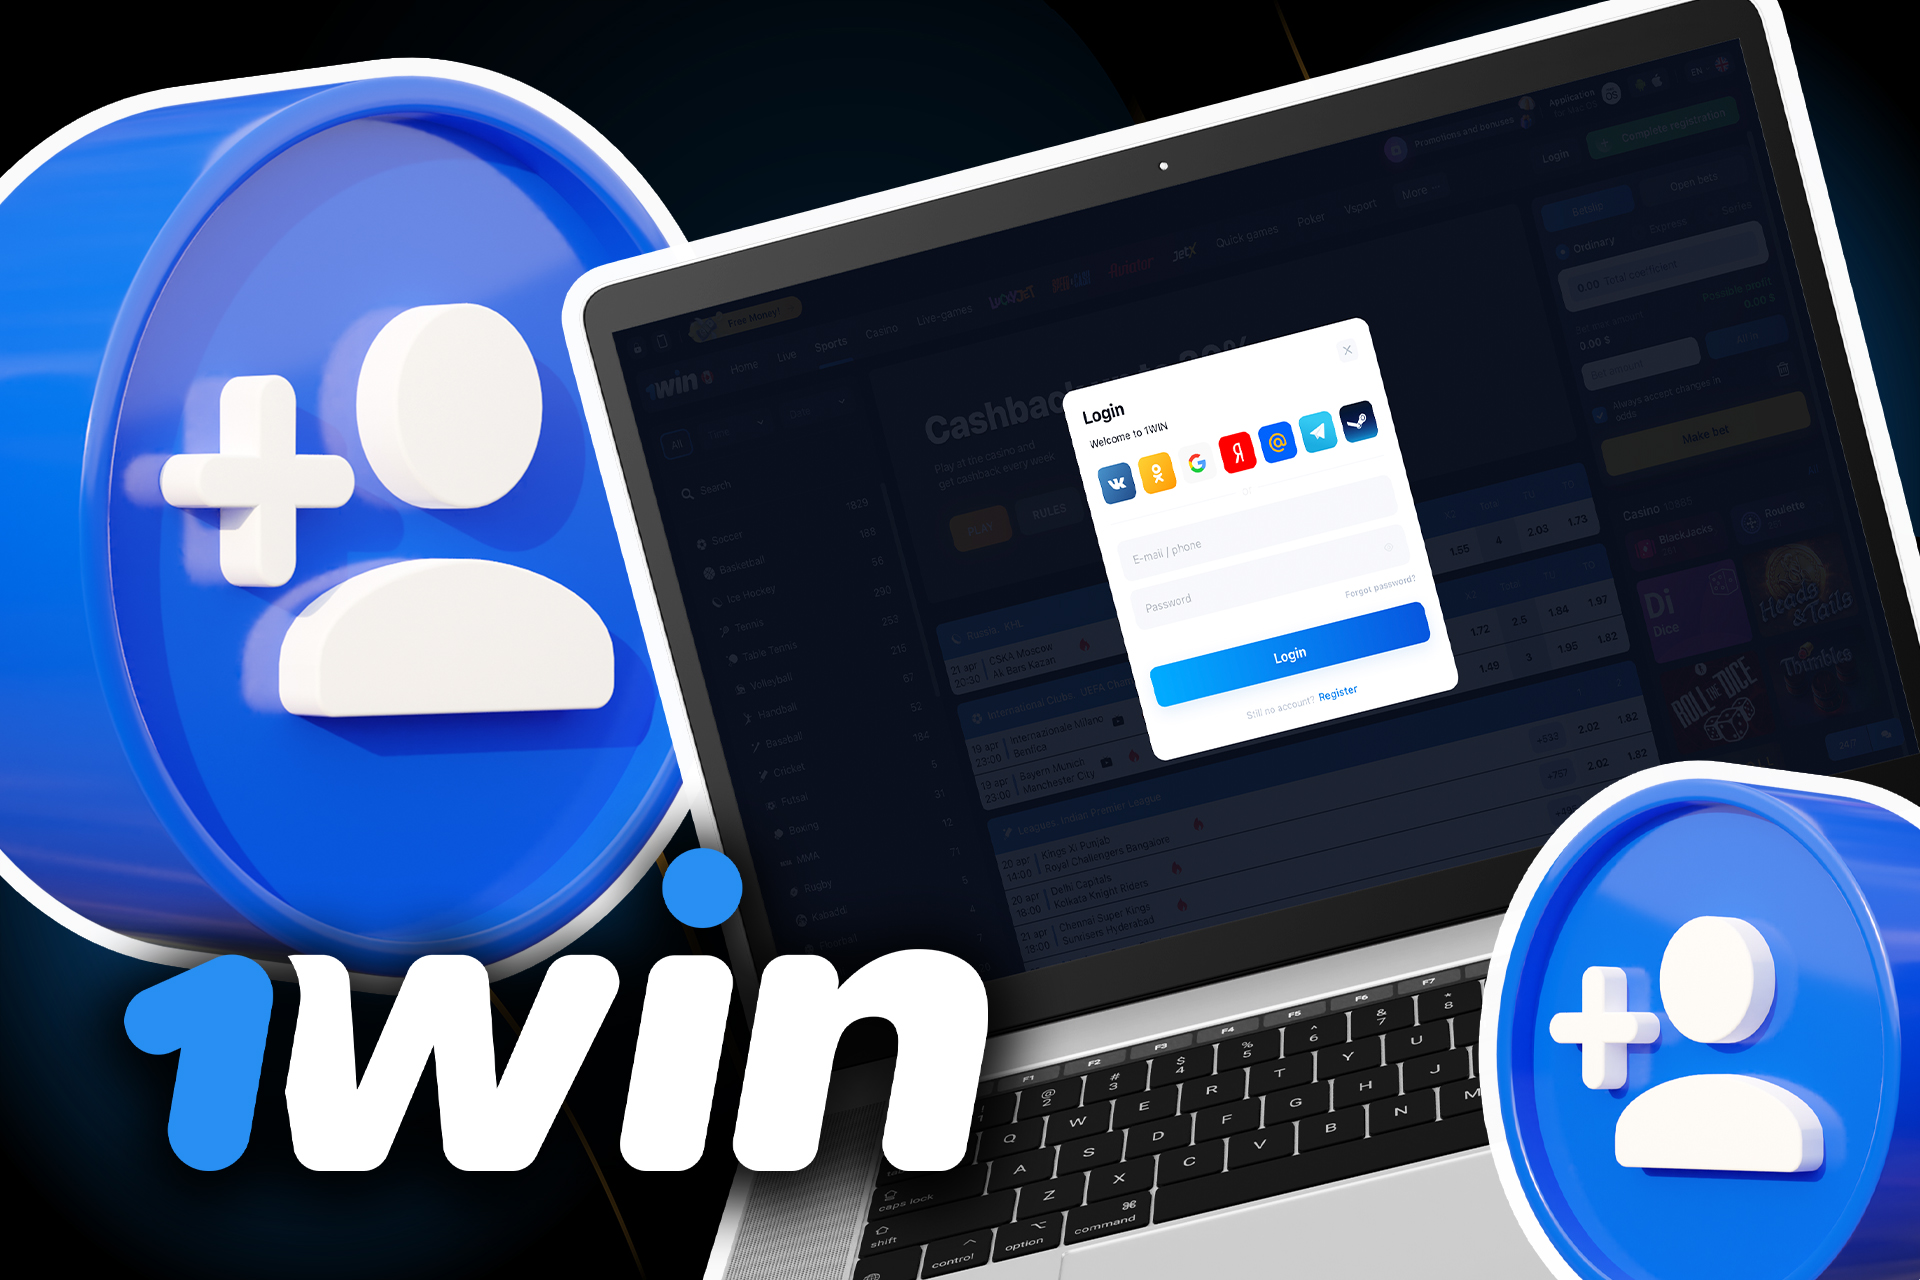 You can sign up for 1win via your social networks' accounts.